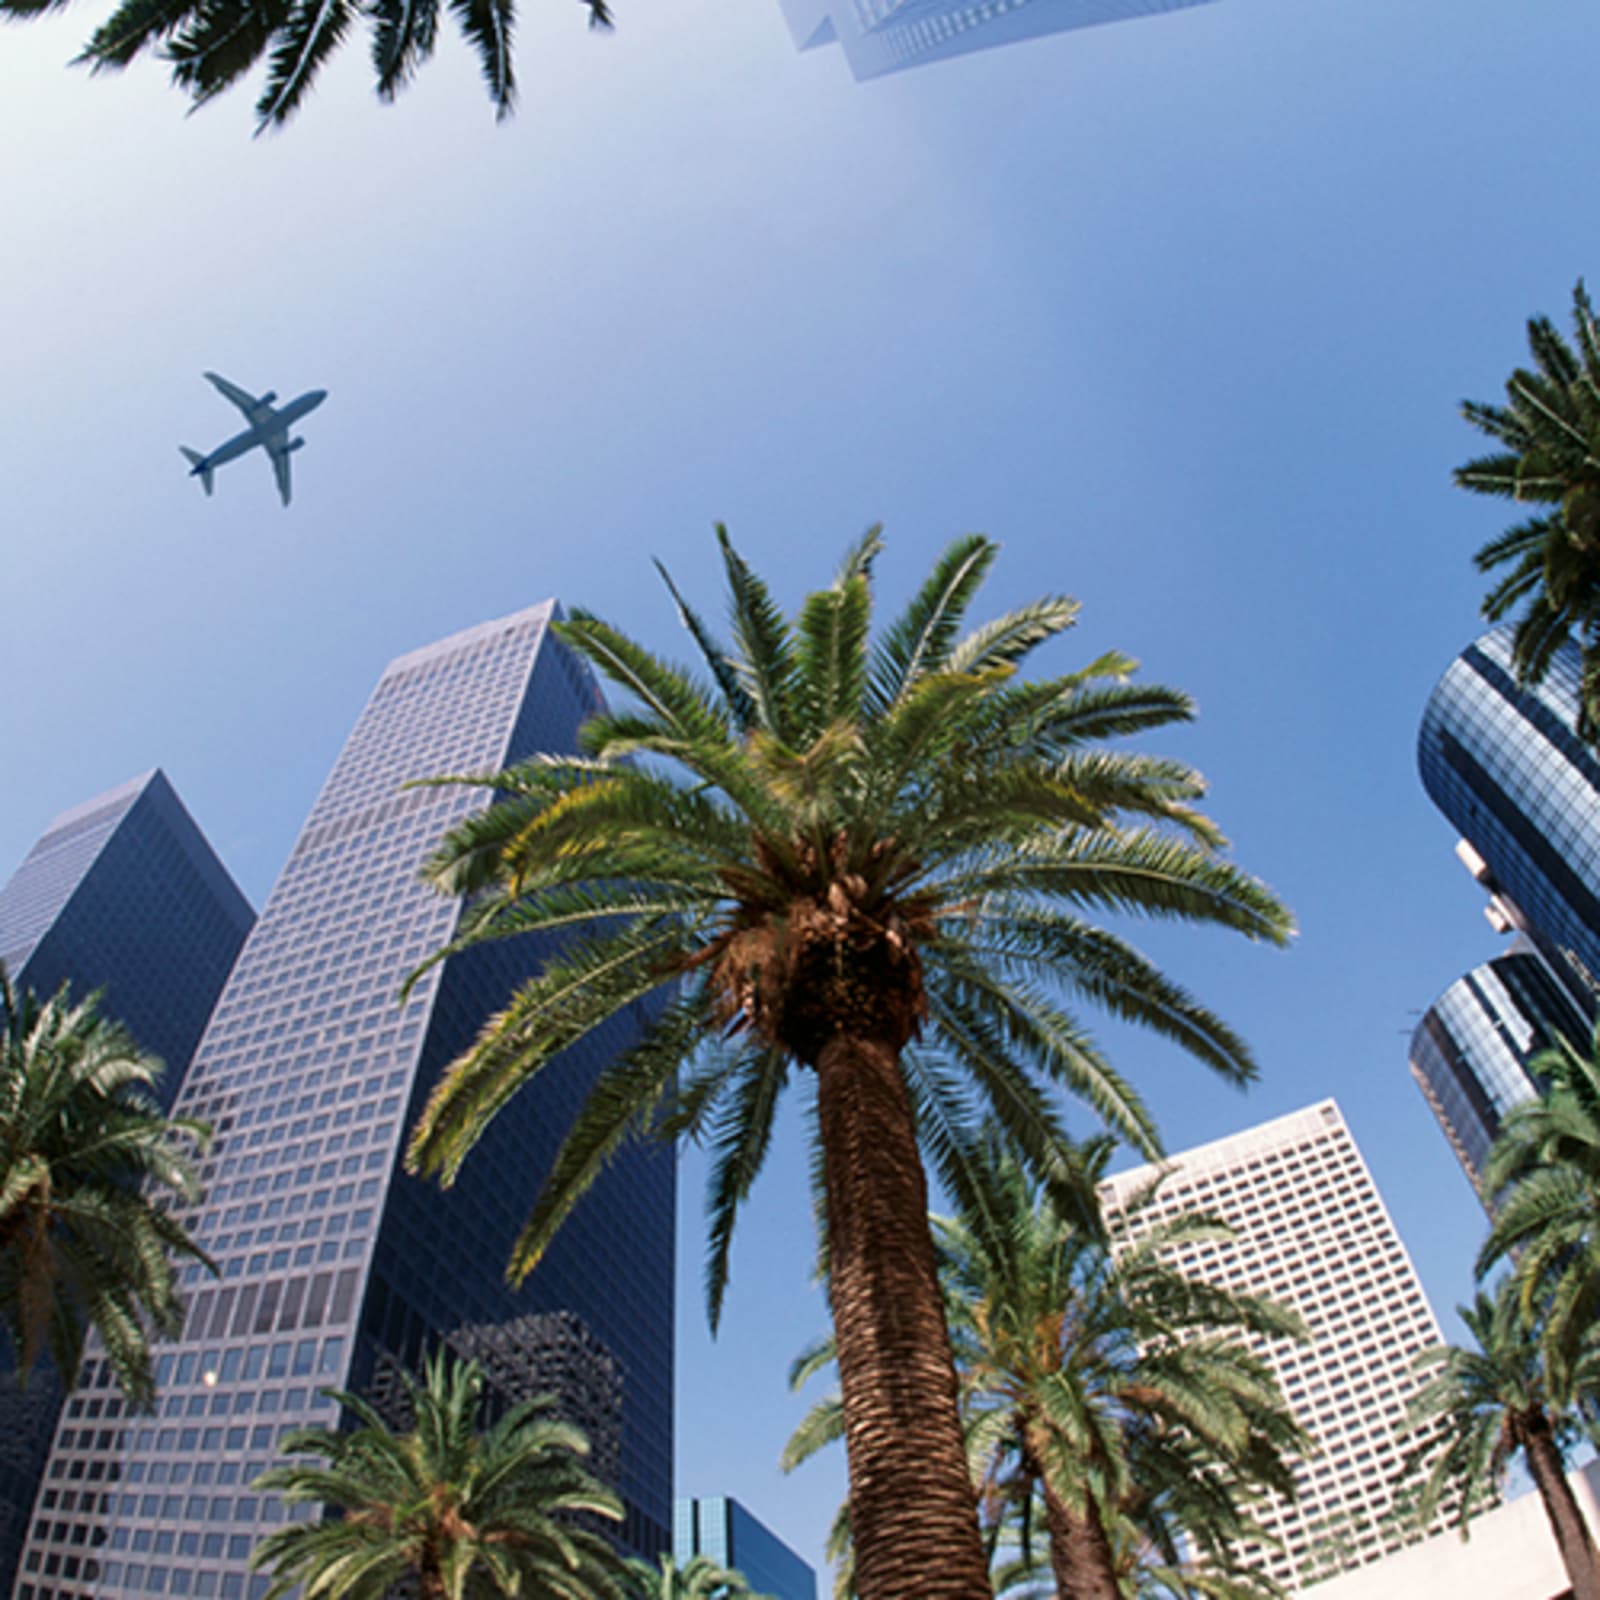 plane flying over skyscrapers and palm trees